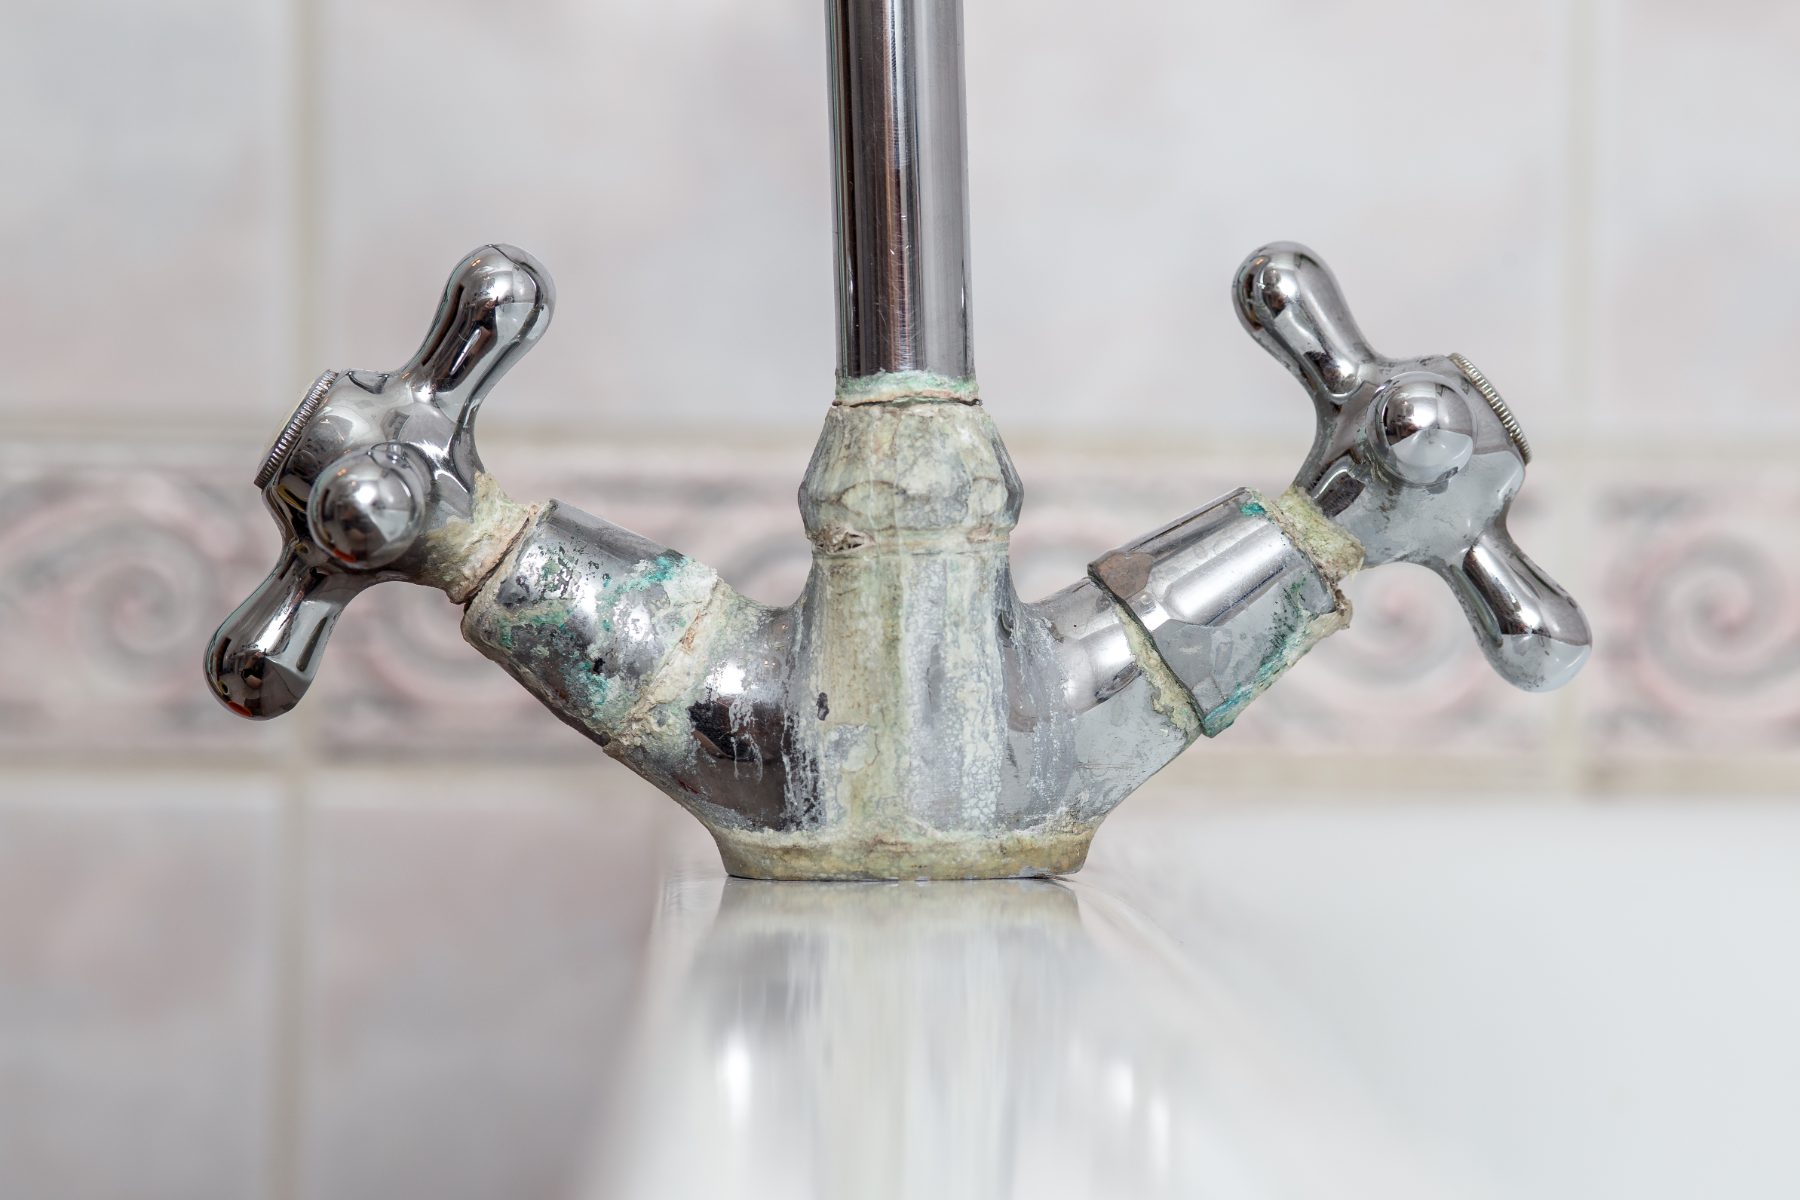 remove limescale from kitchen sink